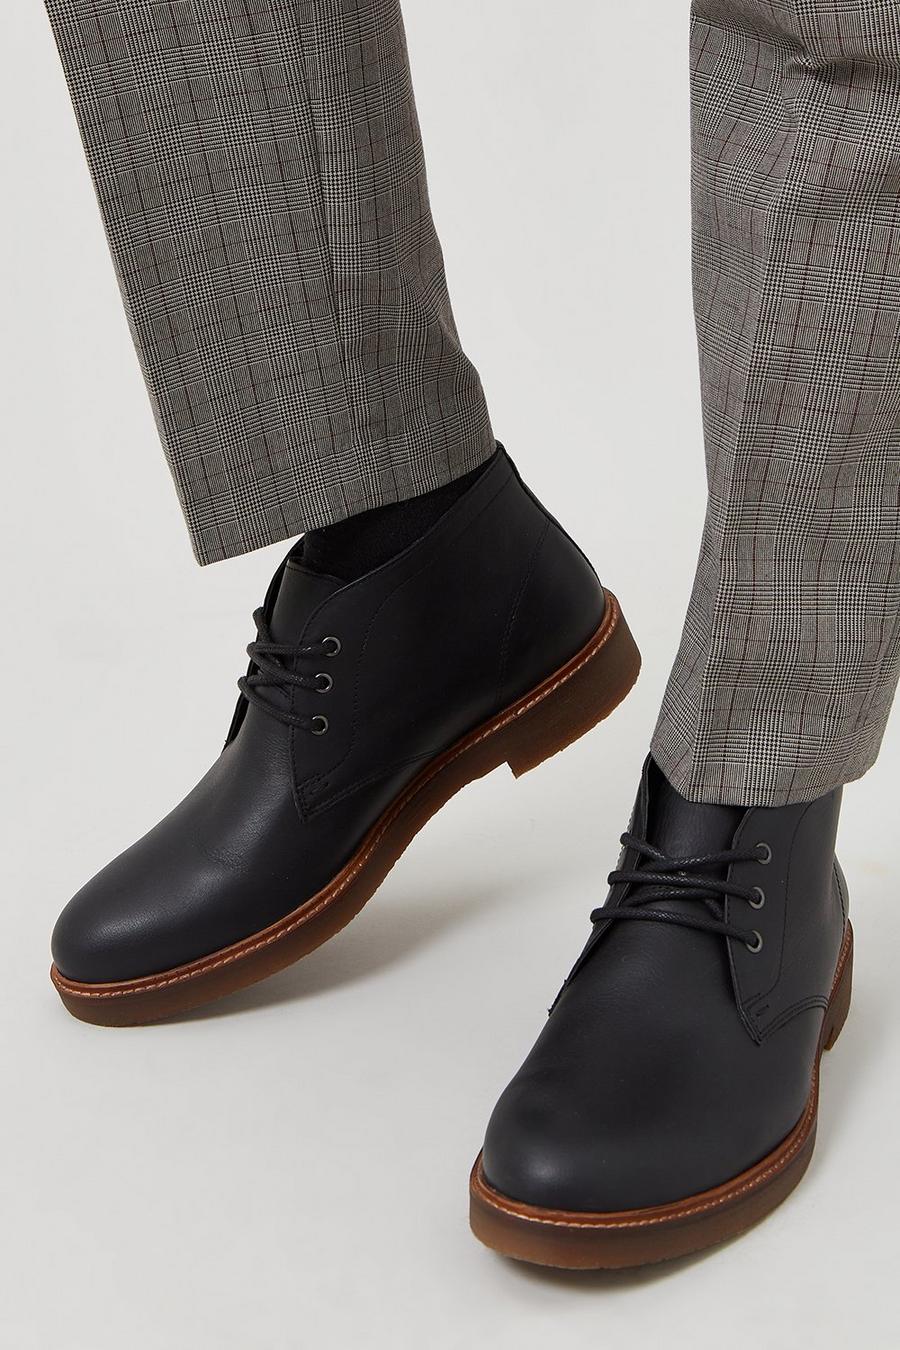 Real Leather Chukka Boots